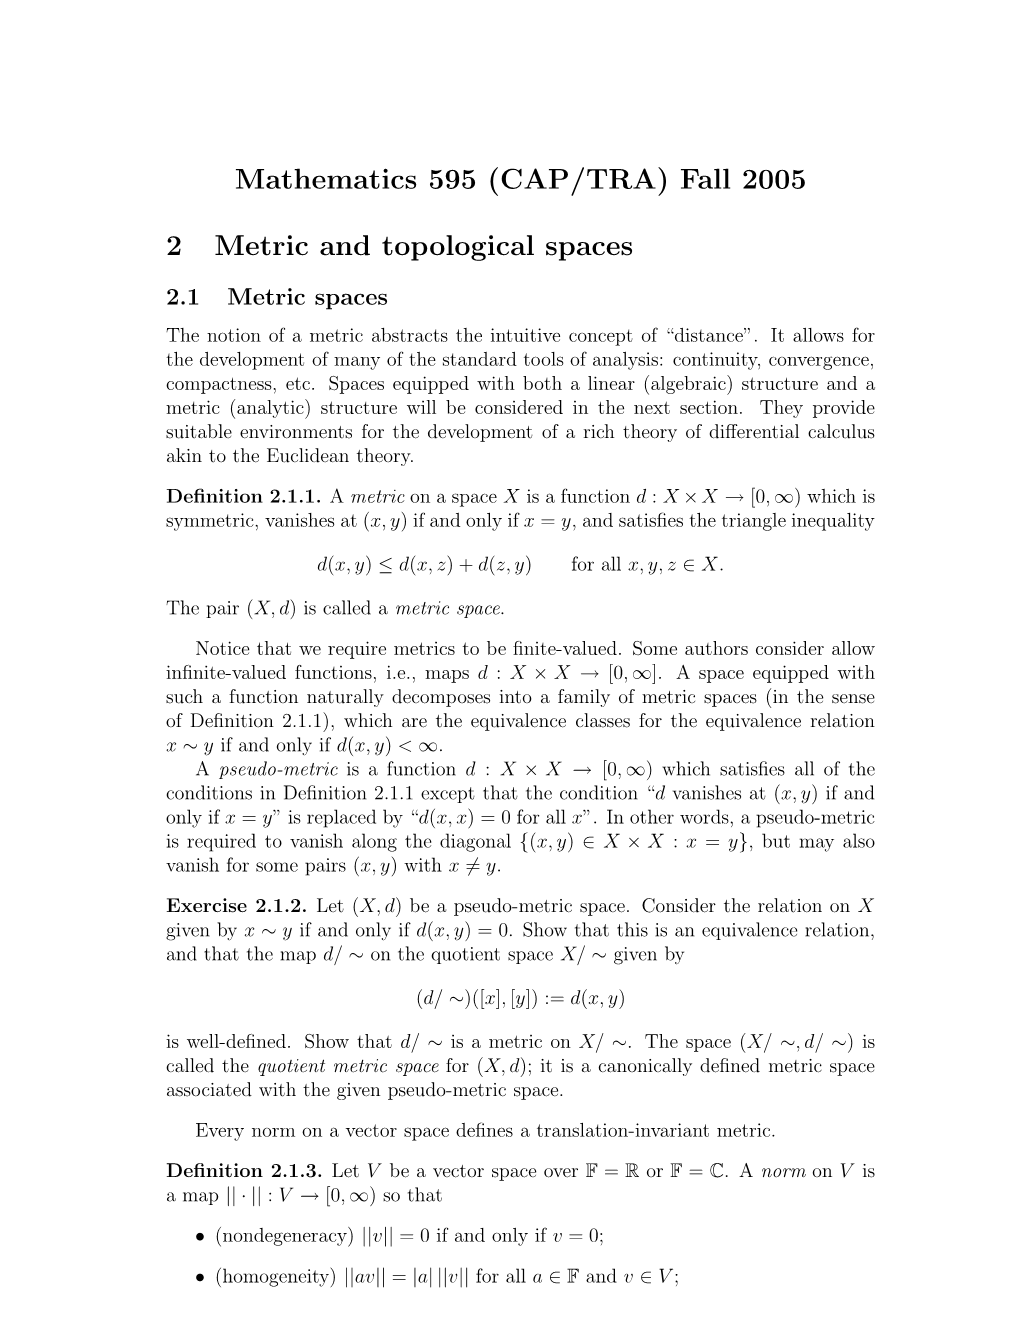 Mathematics 595 (CAP/TRA) Fall 2005 2 Metric and Topological Spaces